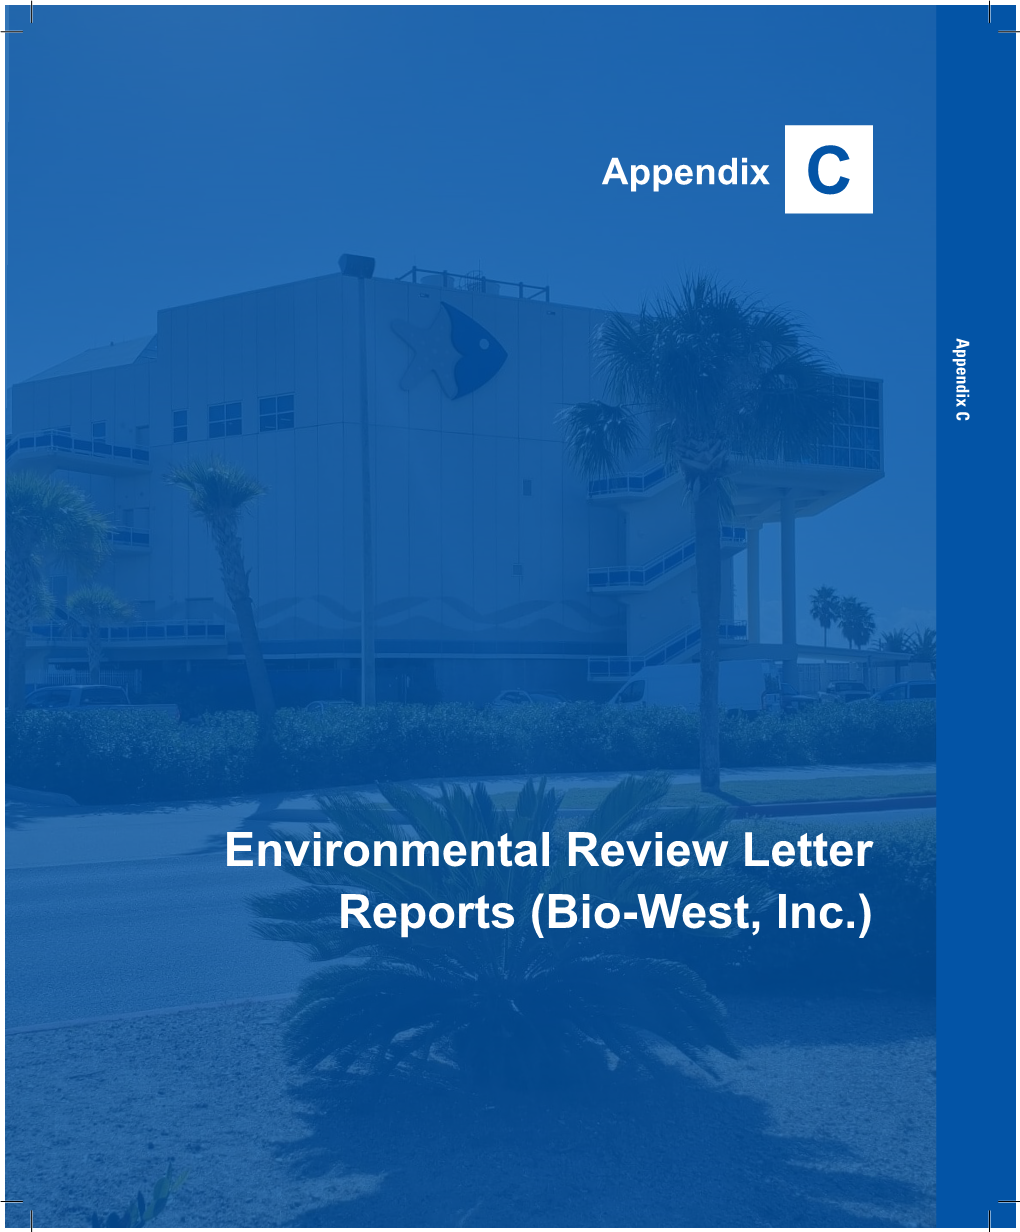 C. Environmental Review Letter Reports (Bio-West, Inc.)